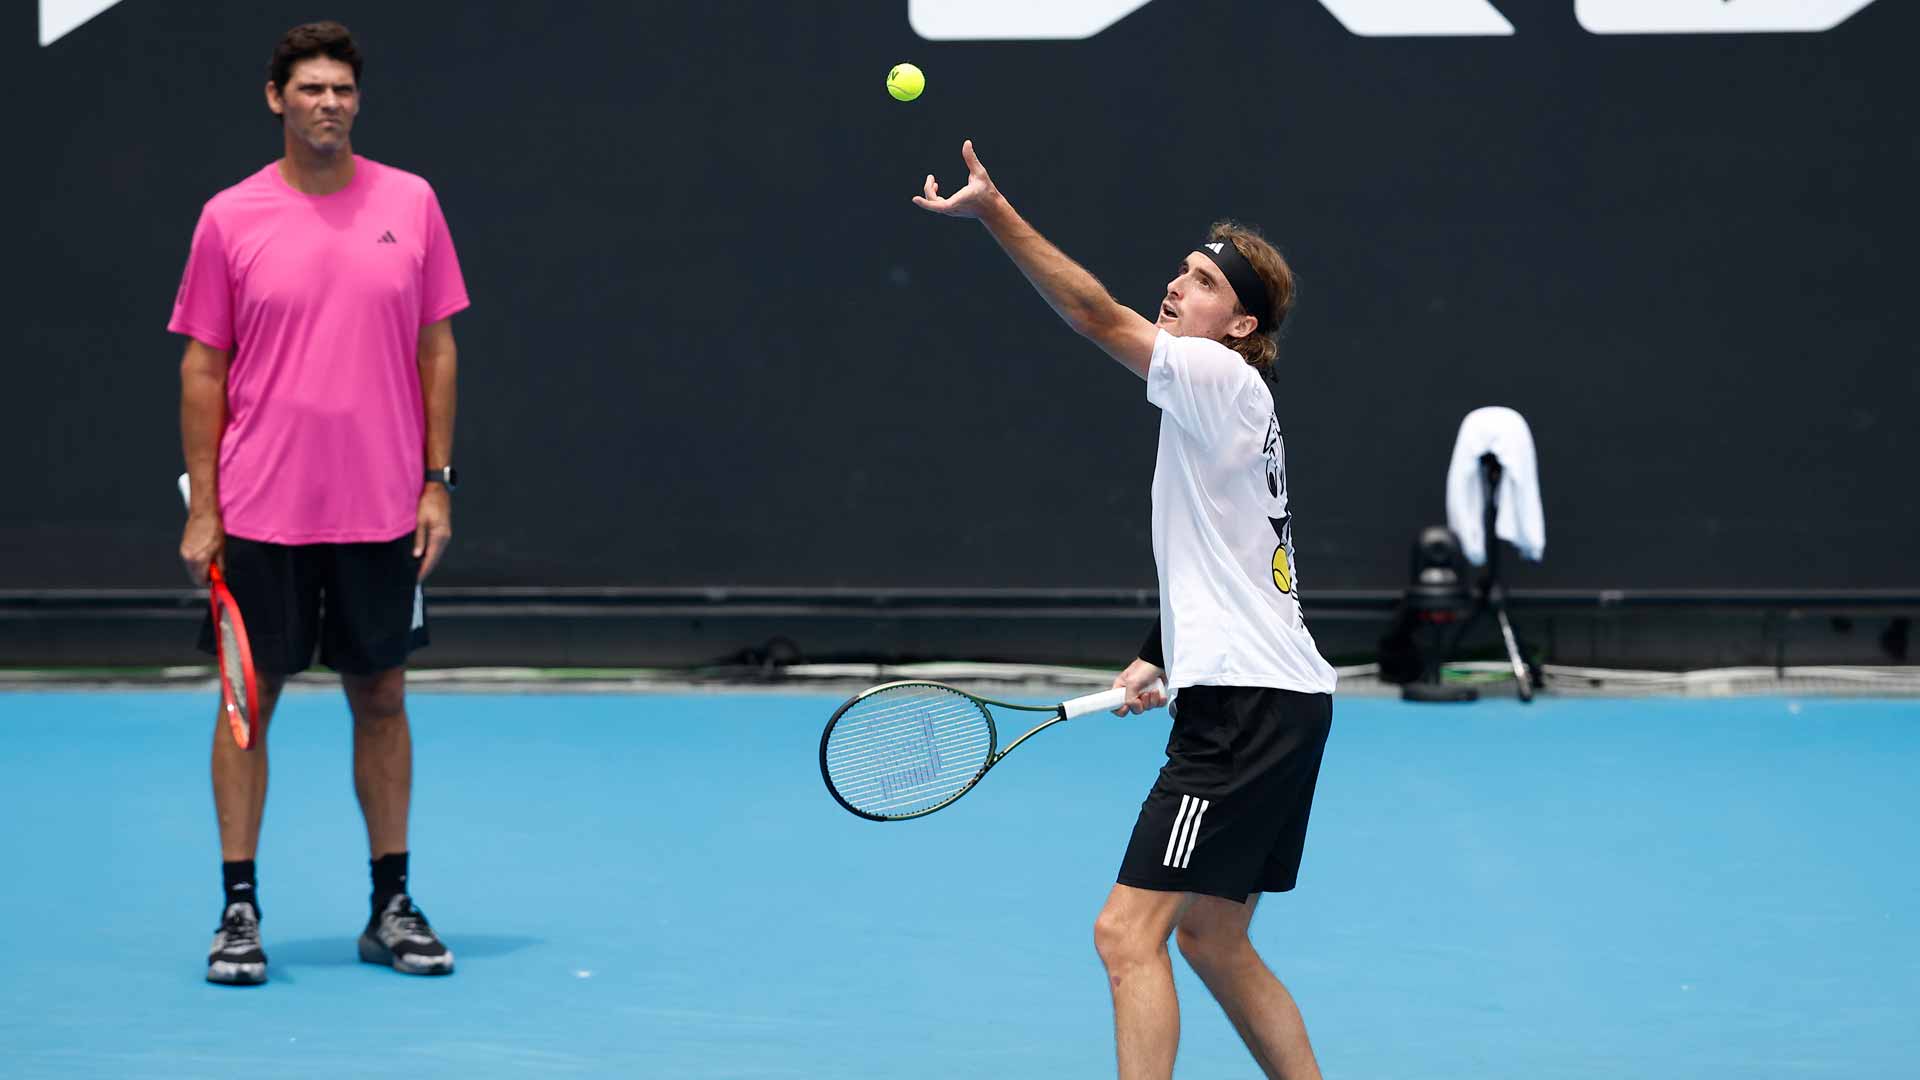 Stefanos Tsitsipas practises at the 2023 Australian Open while Coach Mark Philippoussis watches on.